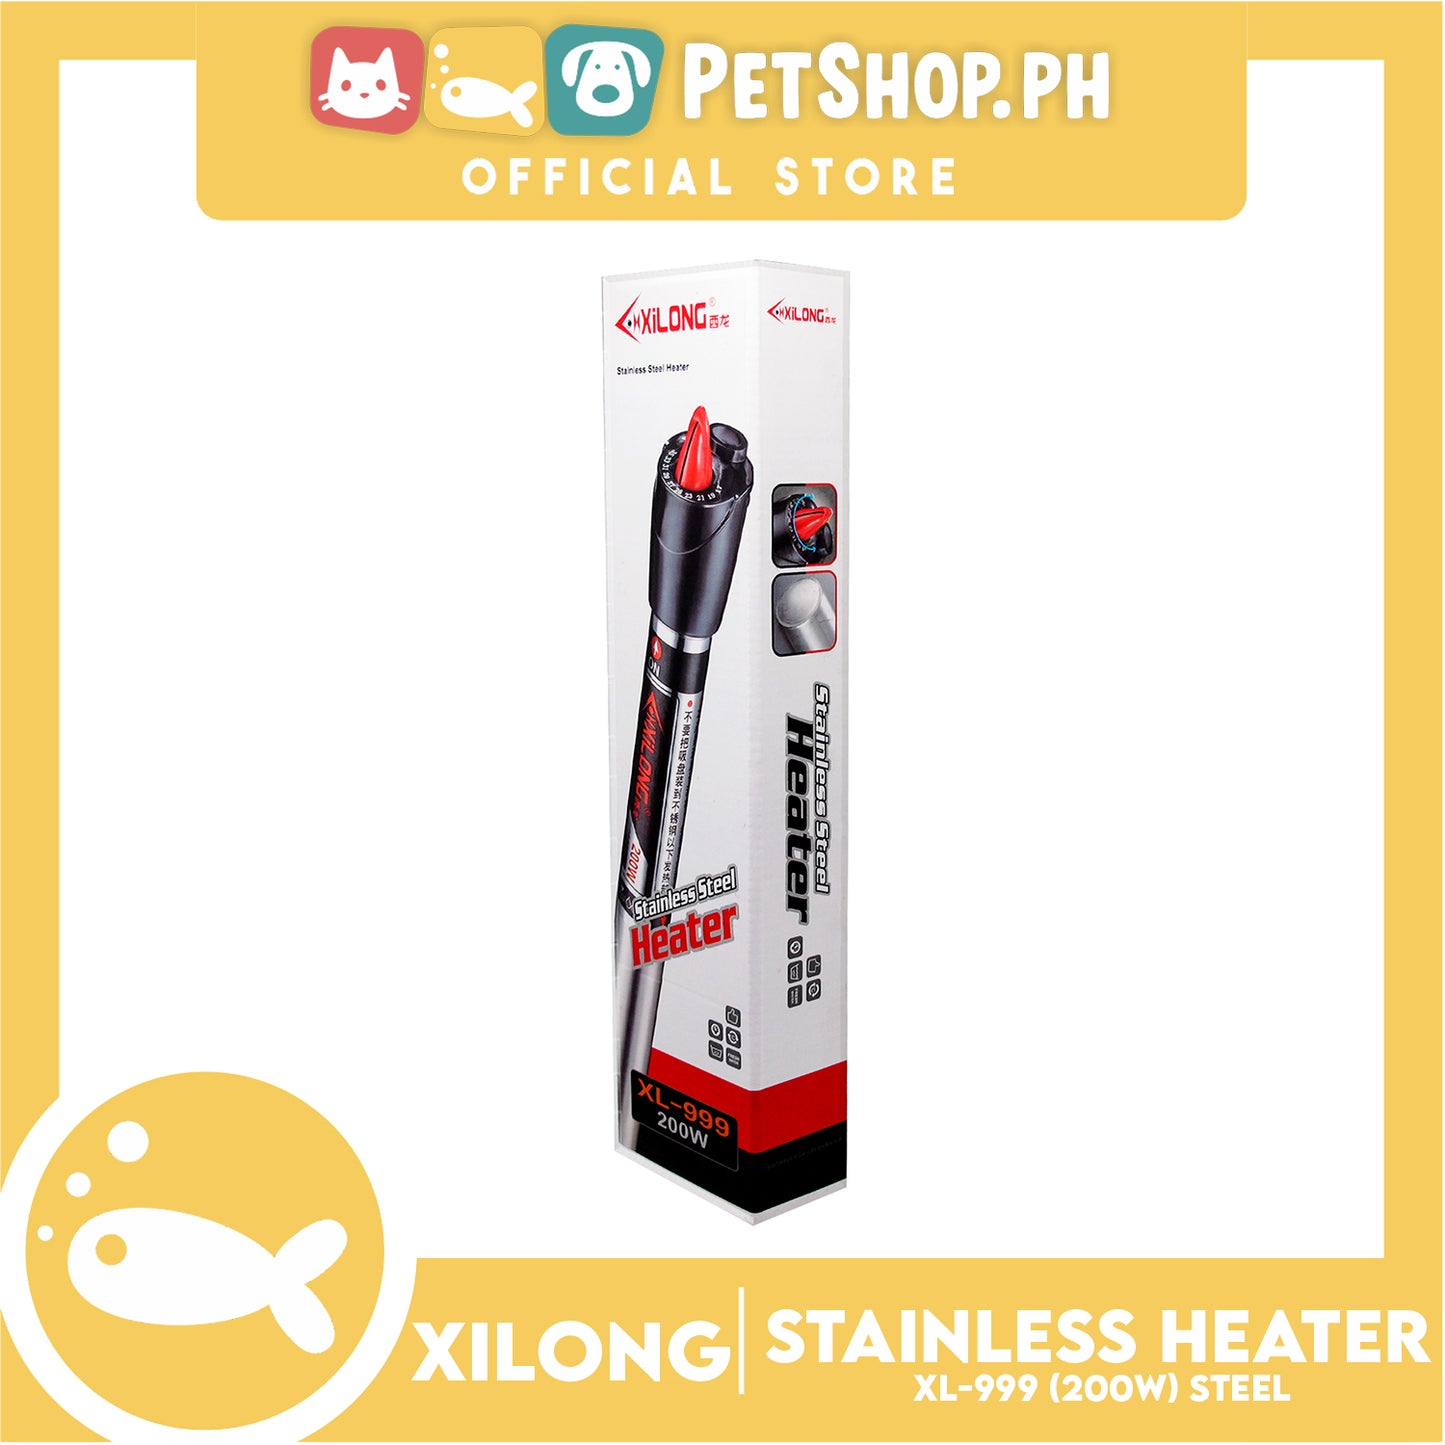 XL-999 Stainless Heater 200w